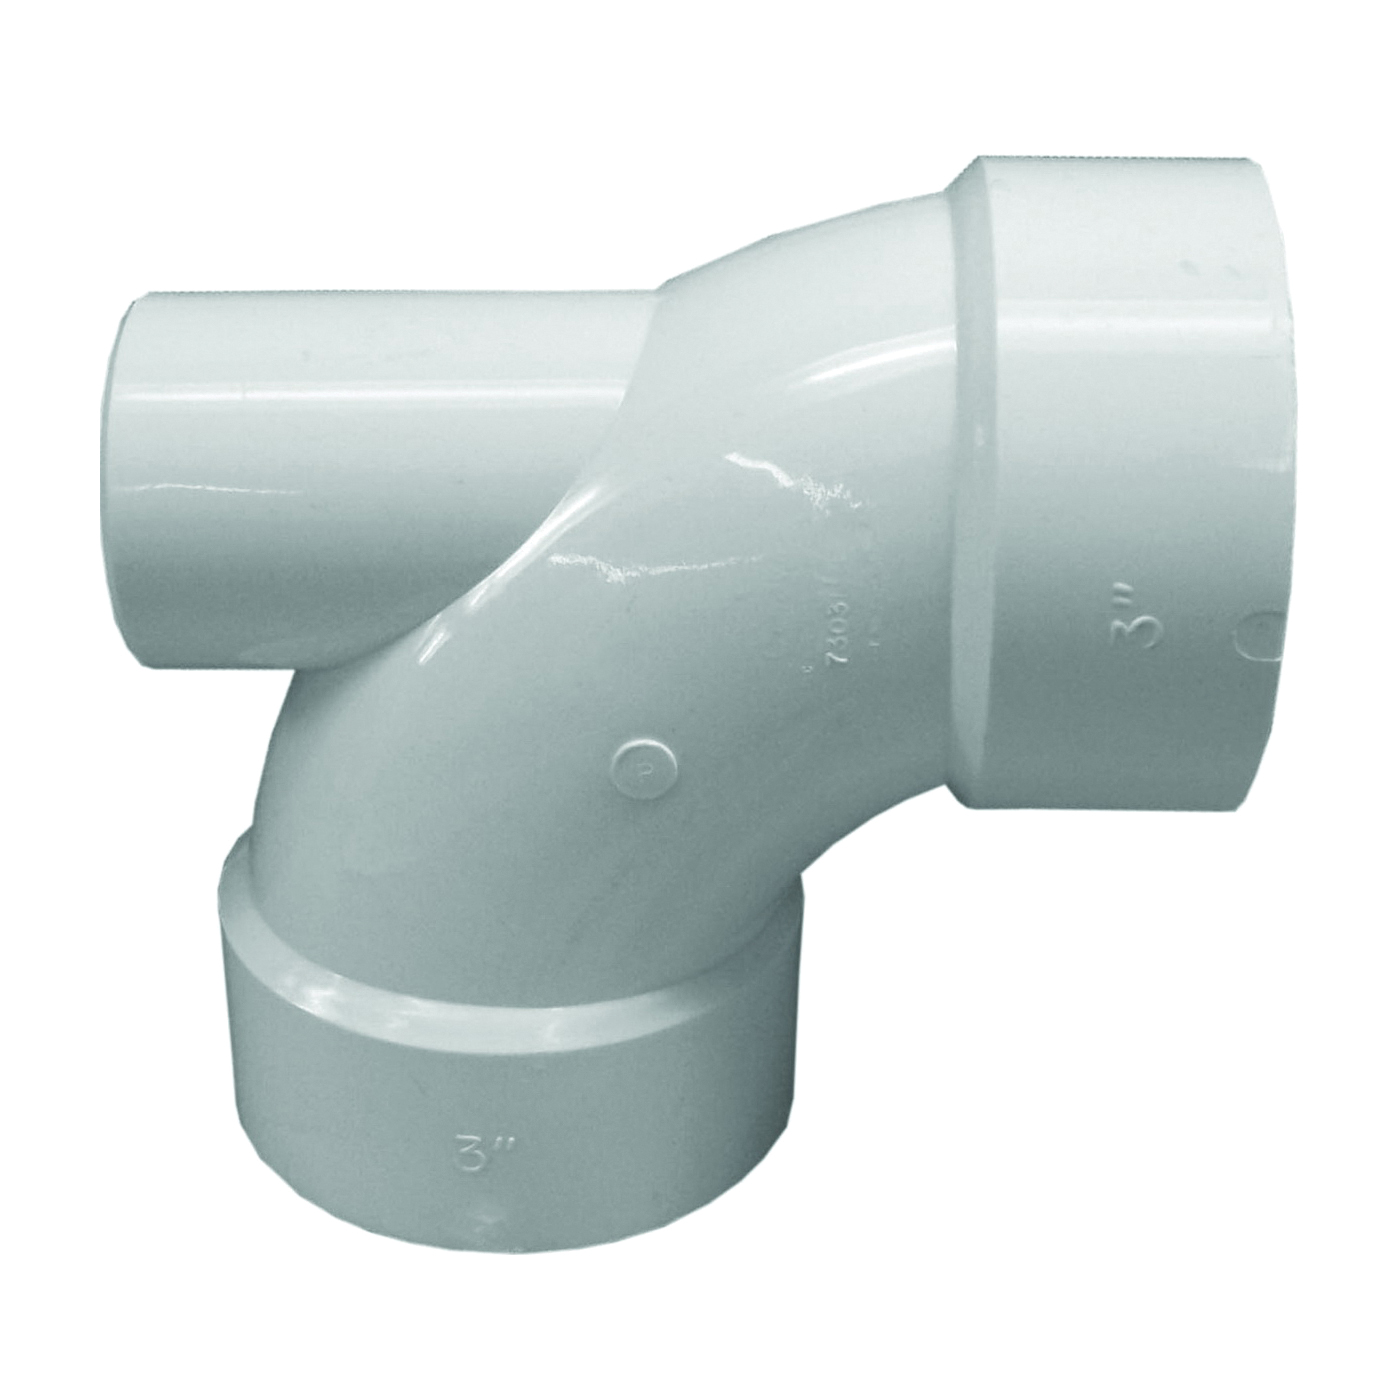 PVC 00303 0600HA Pipe Elbow with Inlet, 3 in, Hub, PVC, White, SCH 40 Schedule